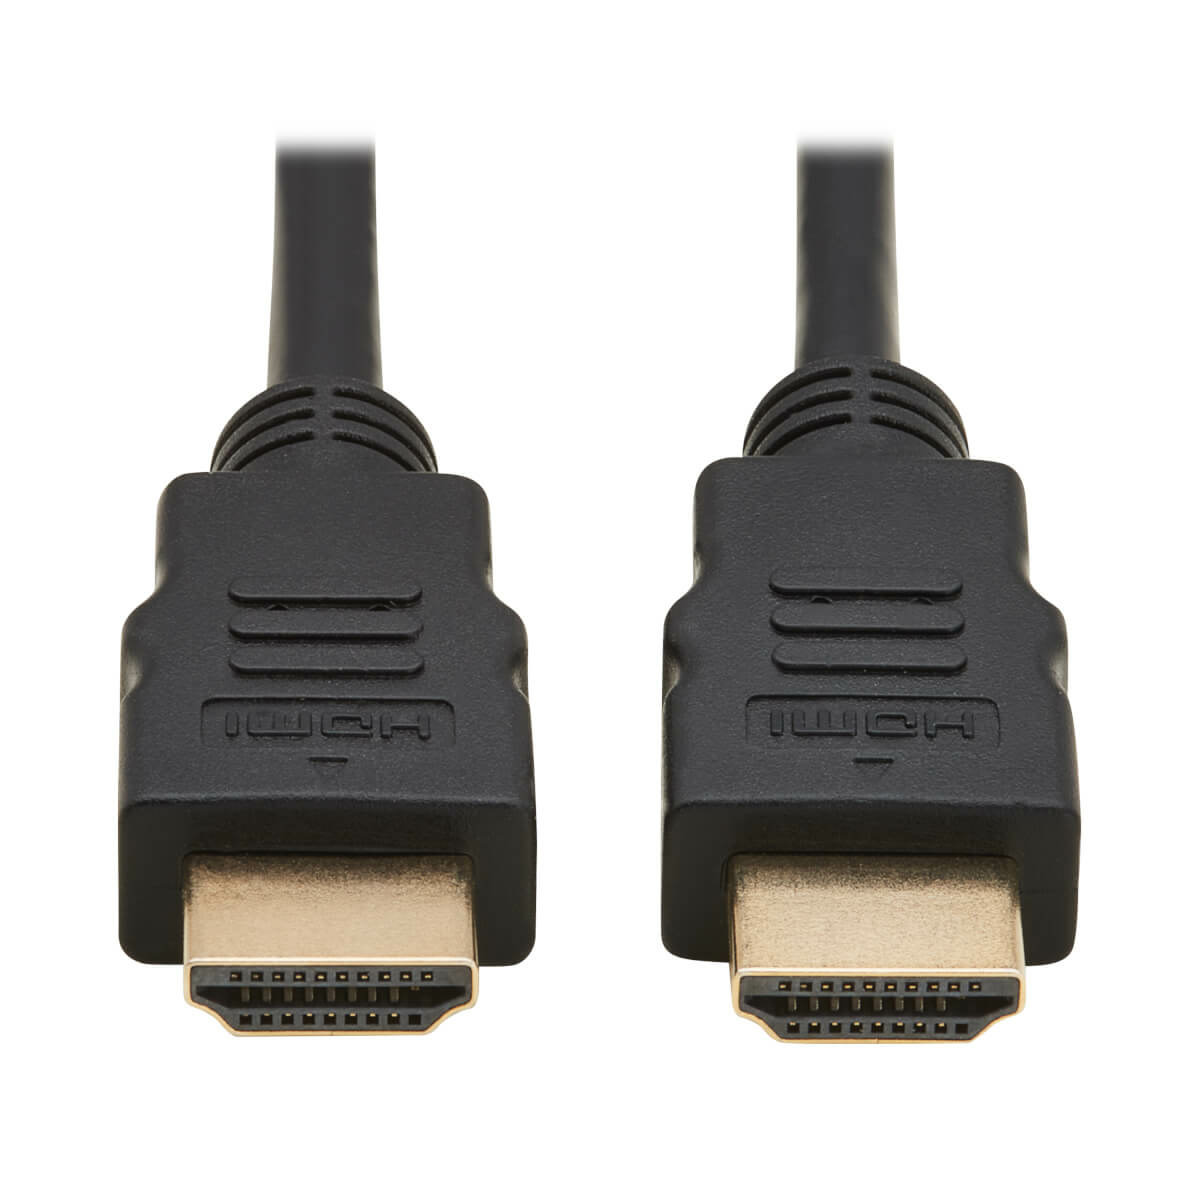 HDMI Gold Digital Video Cable